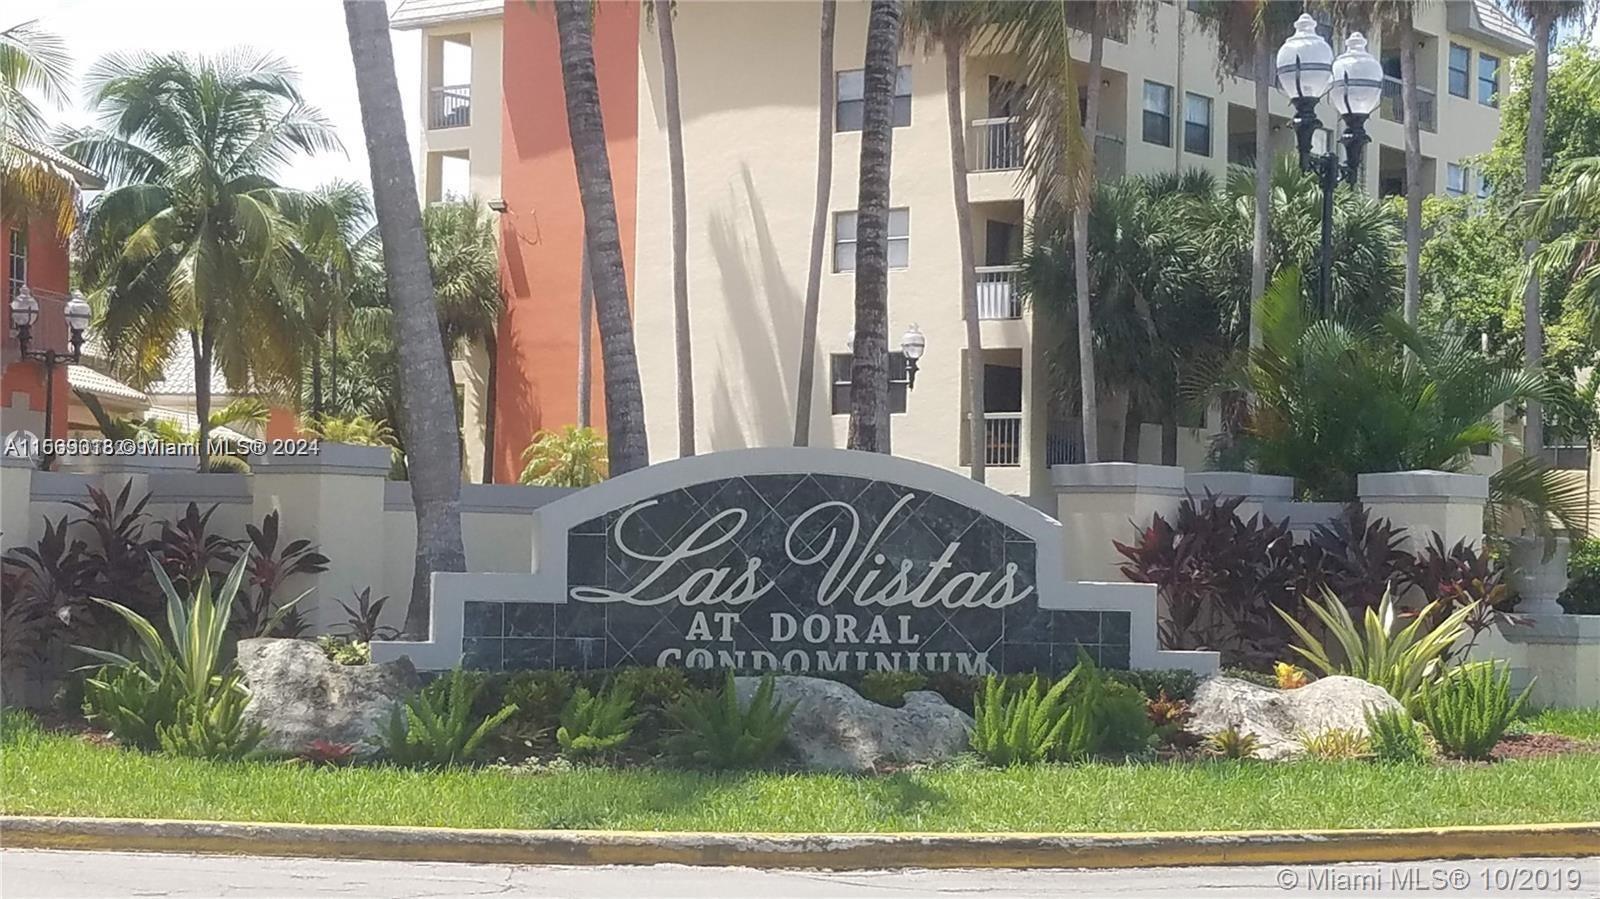 8235 Lake Dr 305, Doral, Florida 33166, 1 Bedroom Bedrooms, ,1 BathroomBathrooms,Residentiallease,For Rent,8235 Lake Dr 305,A11569018